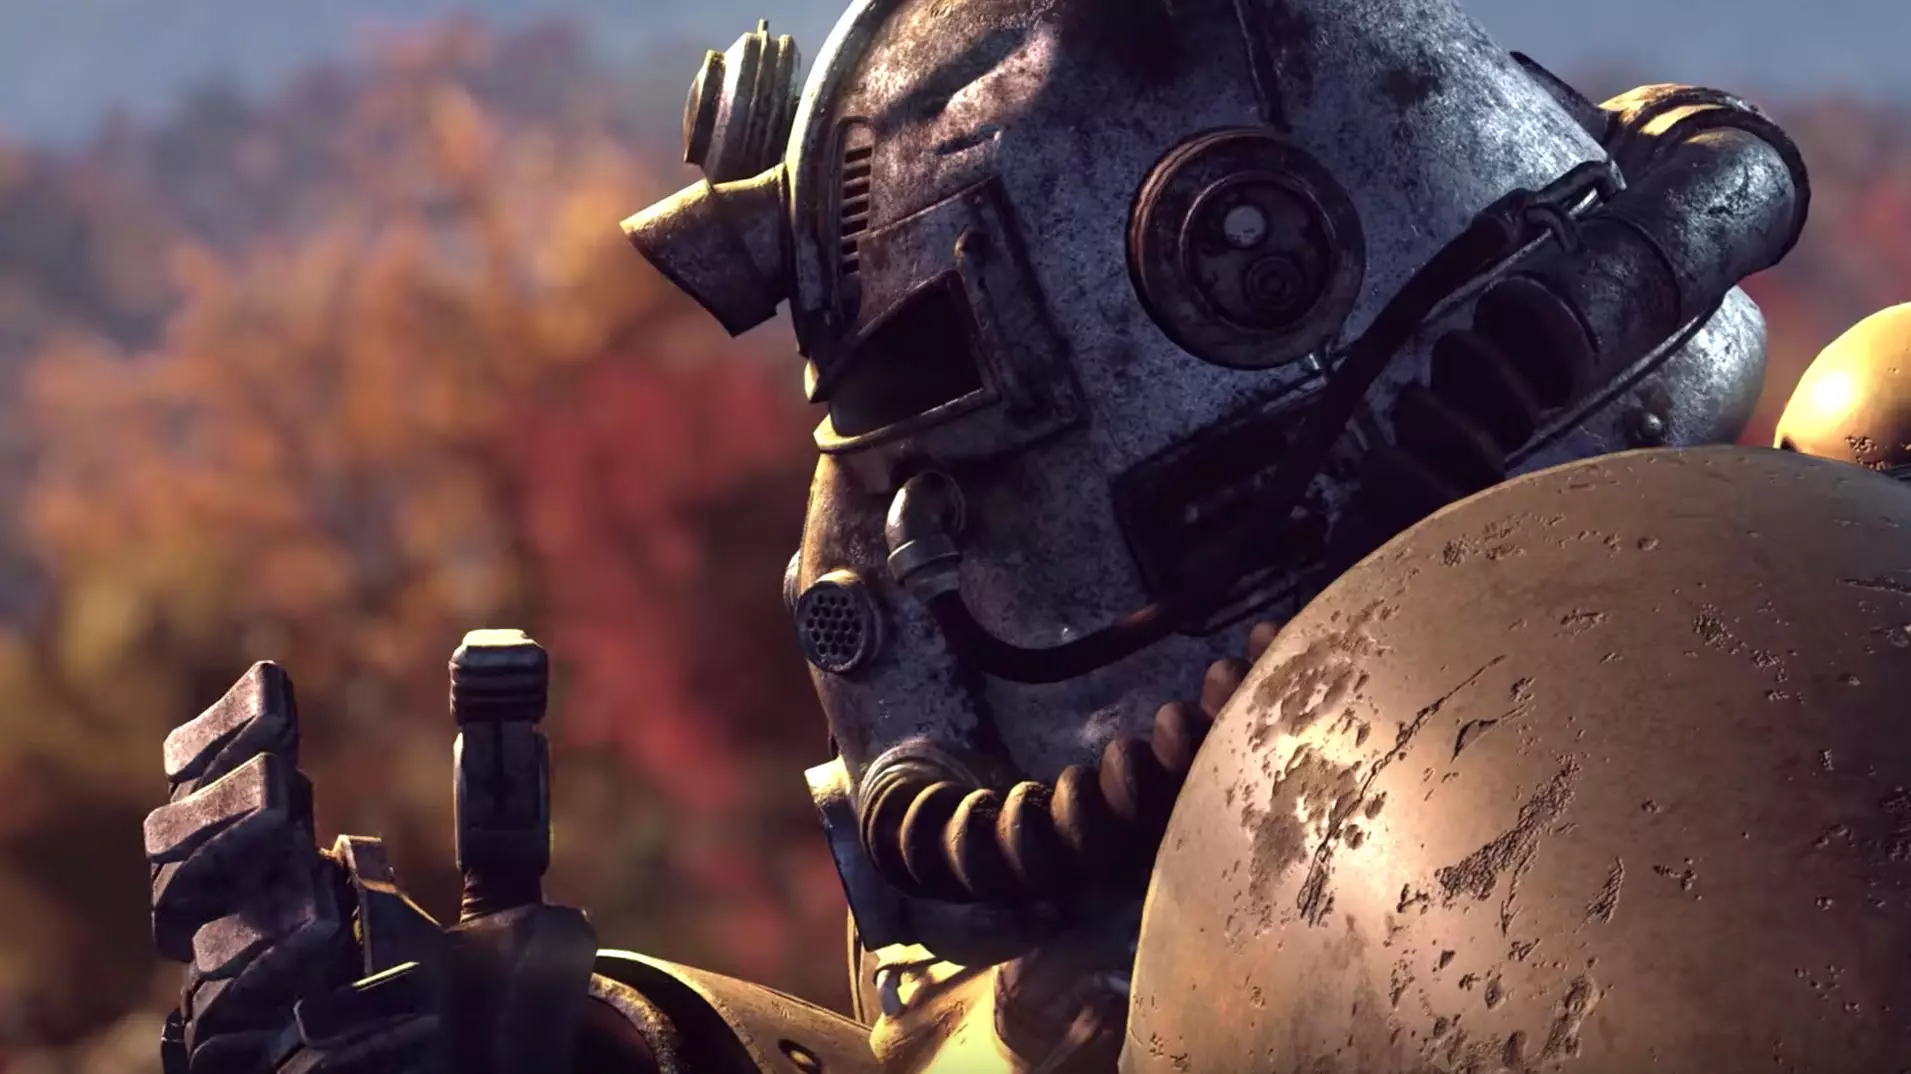 Fallout 76 was supposed to only receive cosmetic microtransations